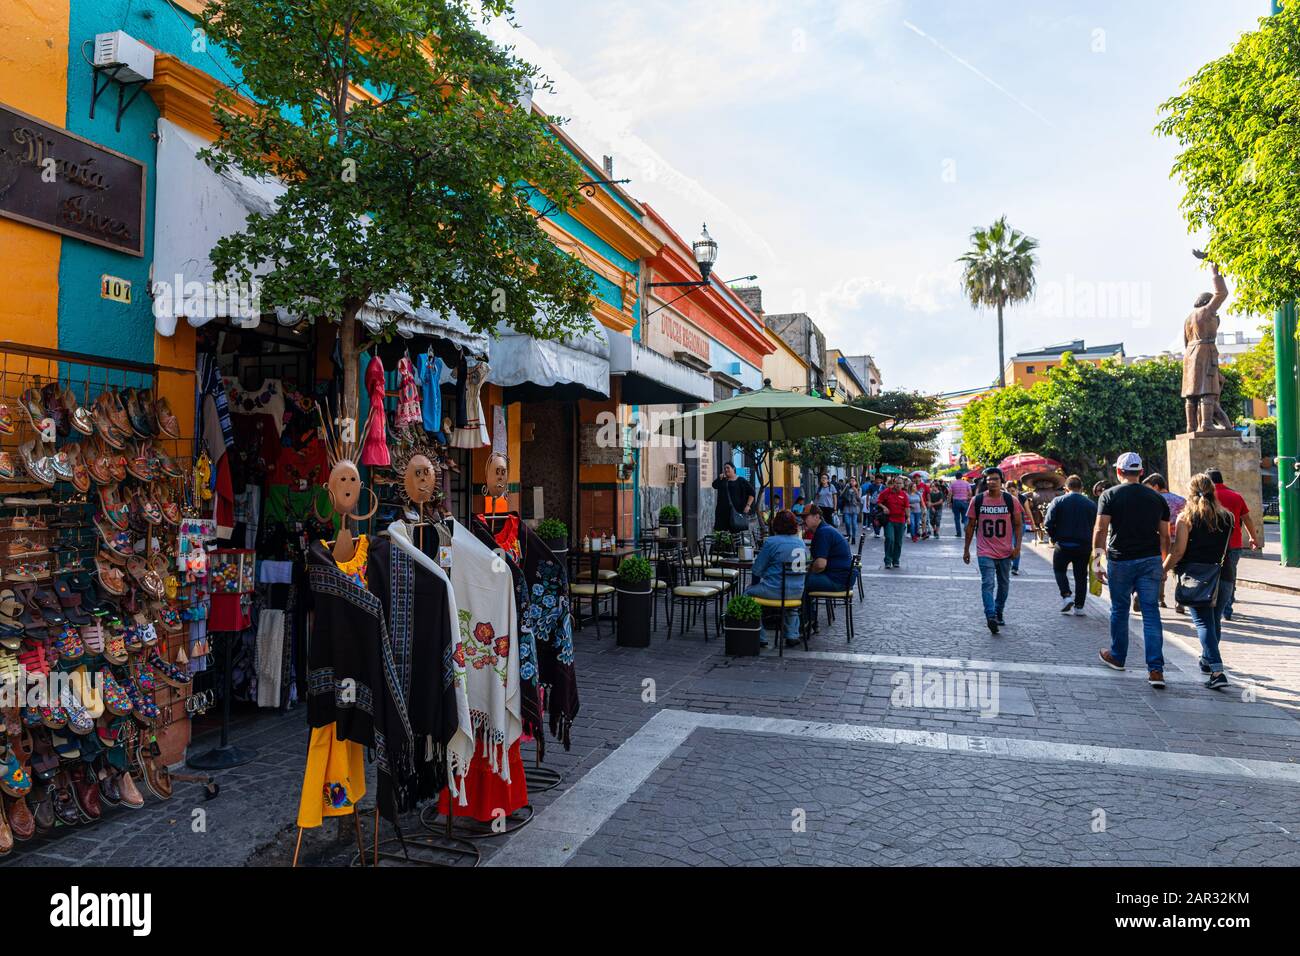 San Pedro Tlaquepaque, Jalisco, Mexico - November 23, 2019: Locals and Tourists exploring the restaurants and shops on Independencia Street Stock Photo